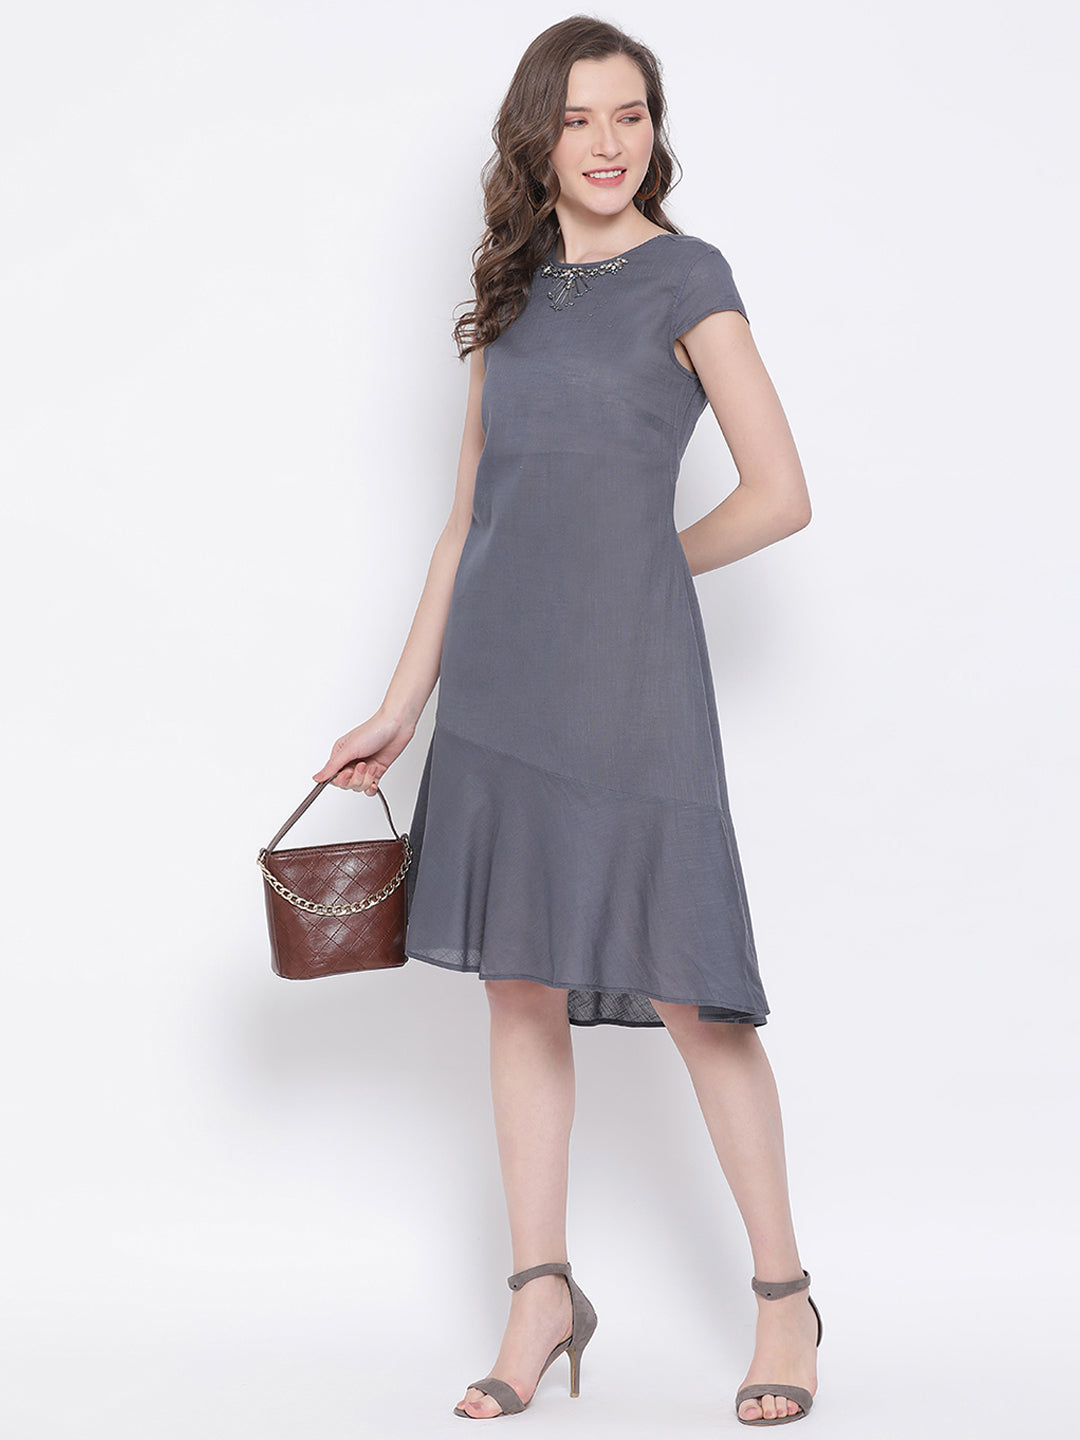 LY2 Cotton hand embelleshed dress